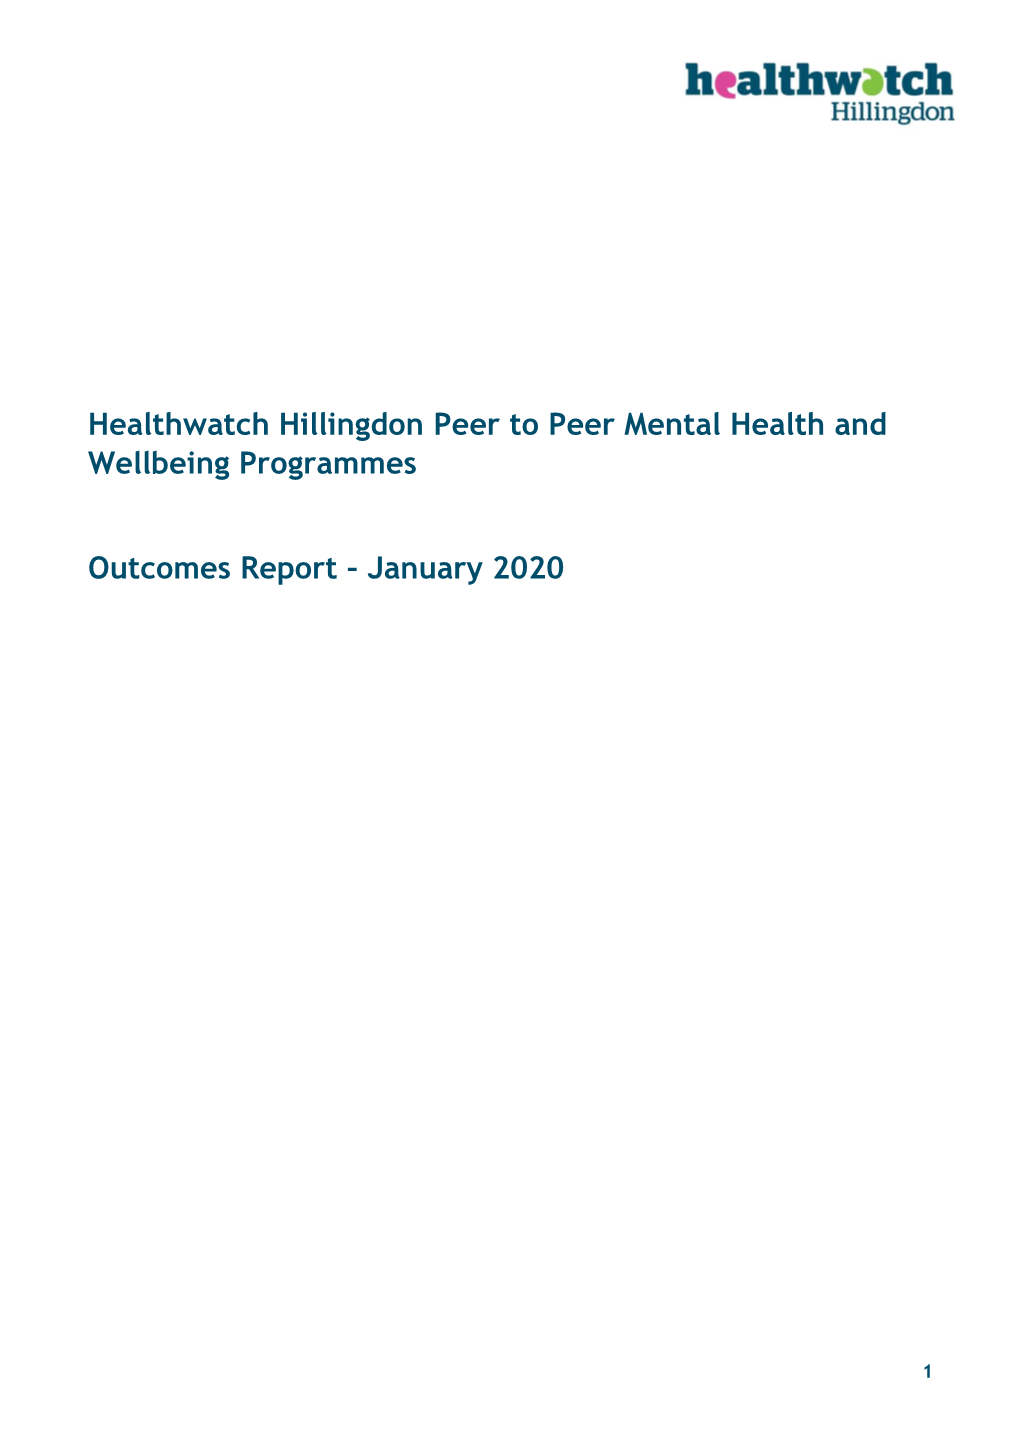 Healthwatch Hillingdon Peer to Peer Mental Health and Wellbeing Programmes Outcomes Report – January 2020